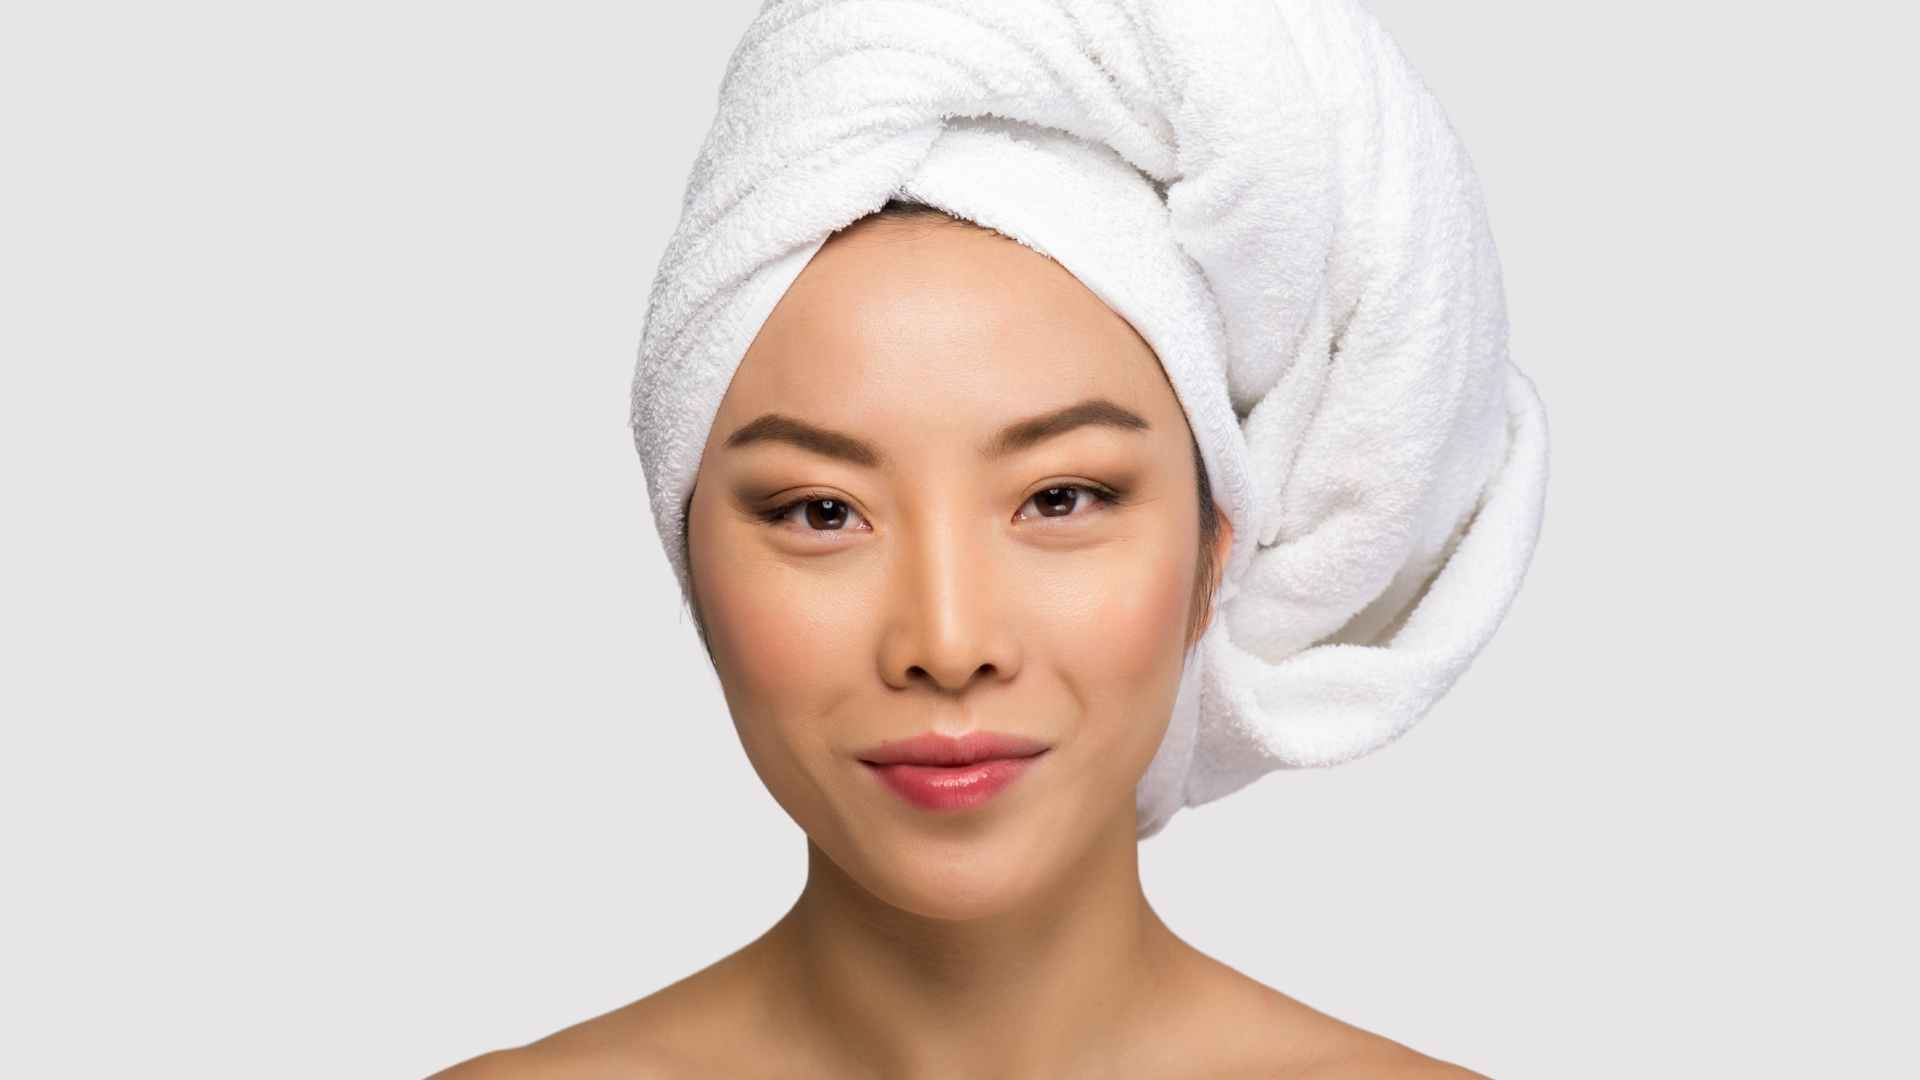 Smiling woman with towel on her head in preparation for a bouncy blow dry